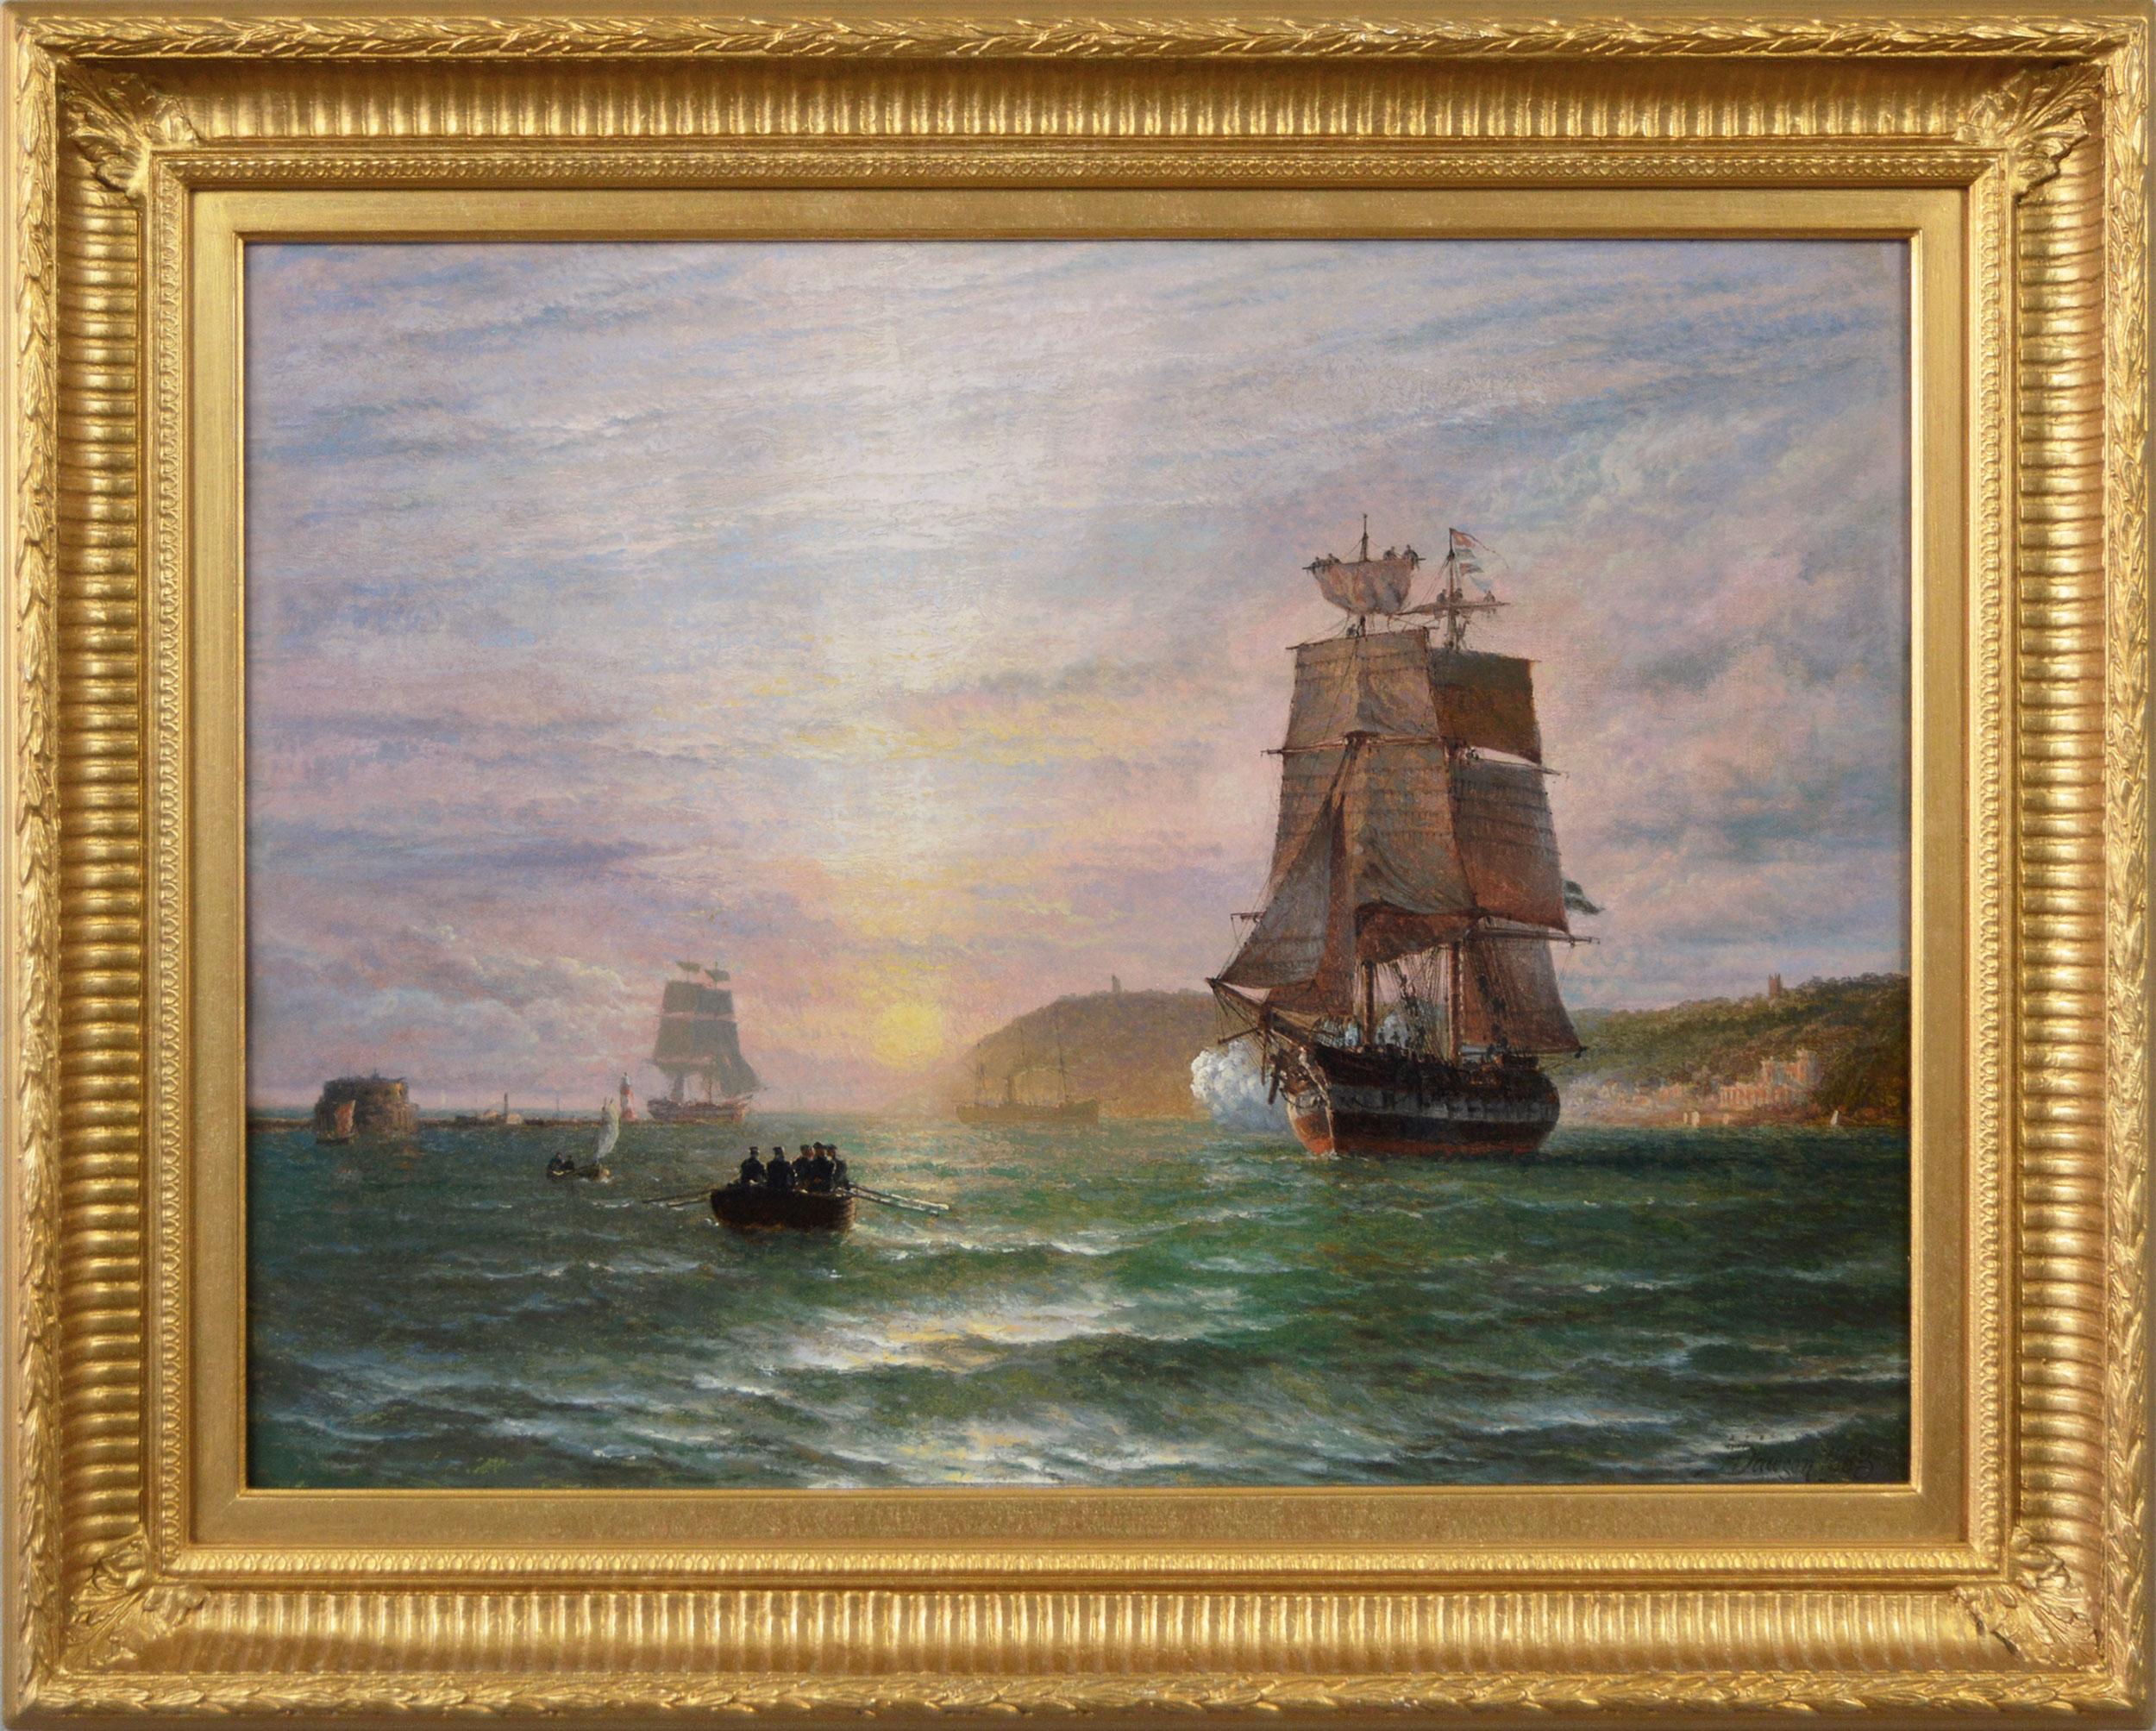 19th Century seascape oil painting of a guardship firing a salute off a coast